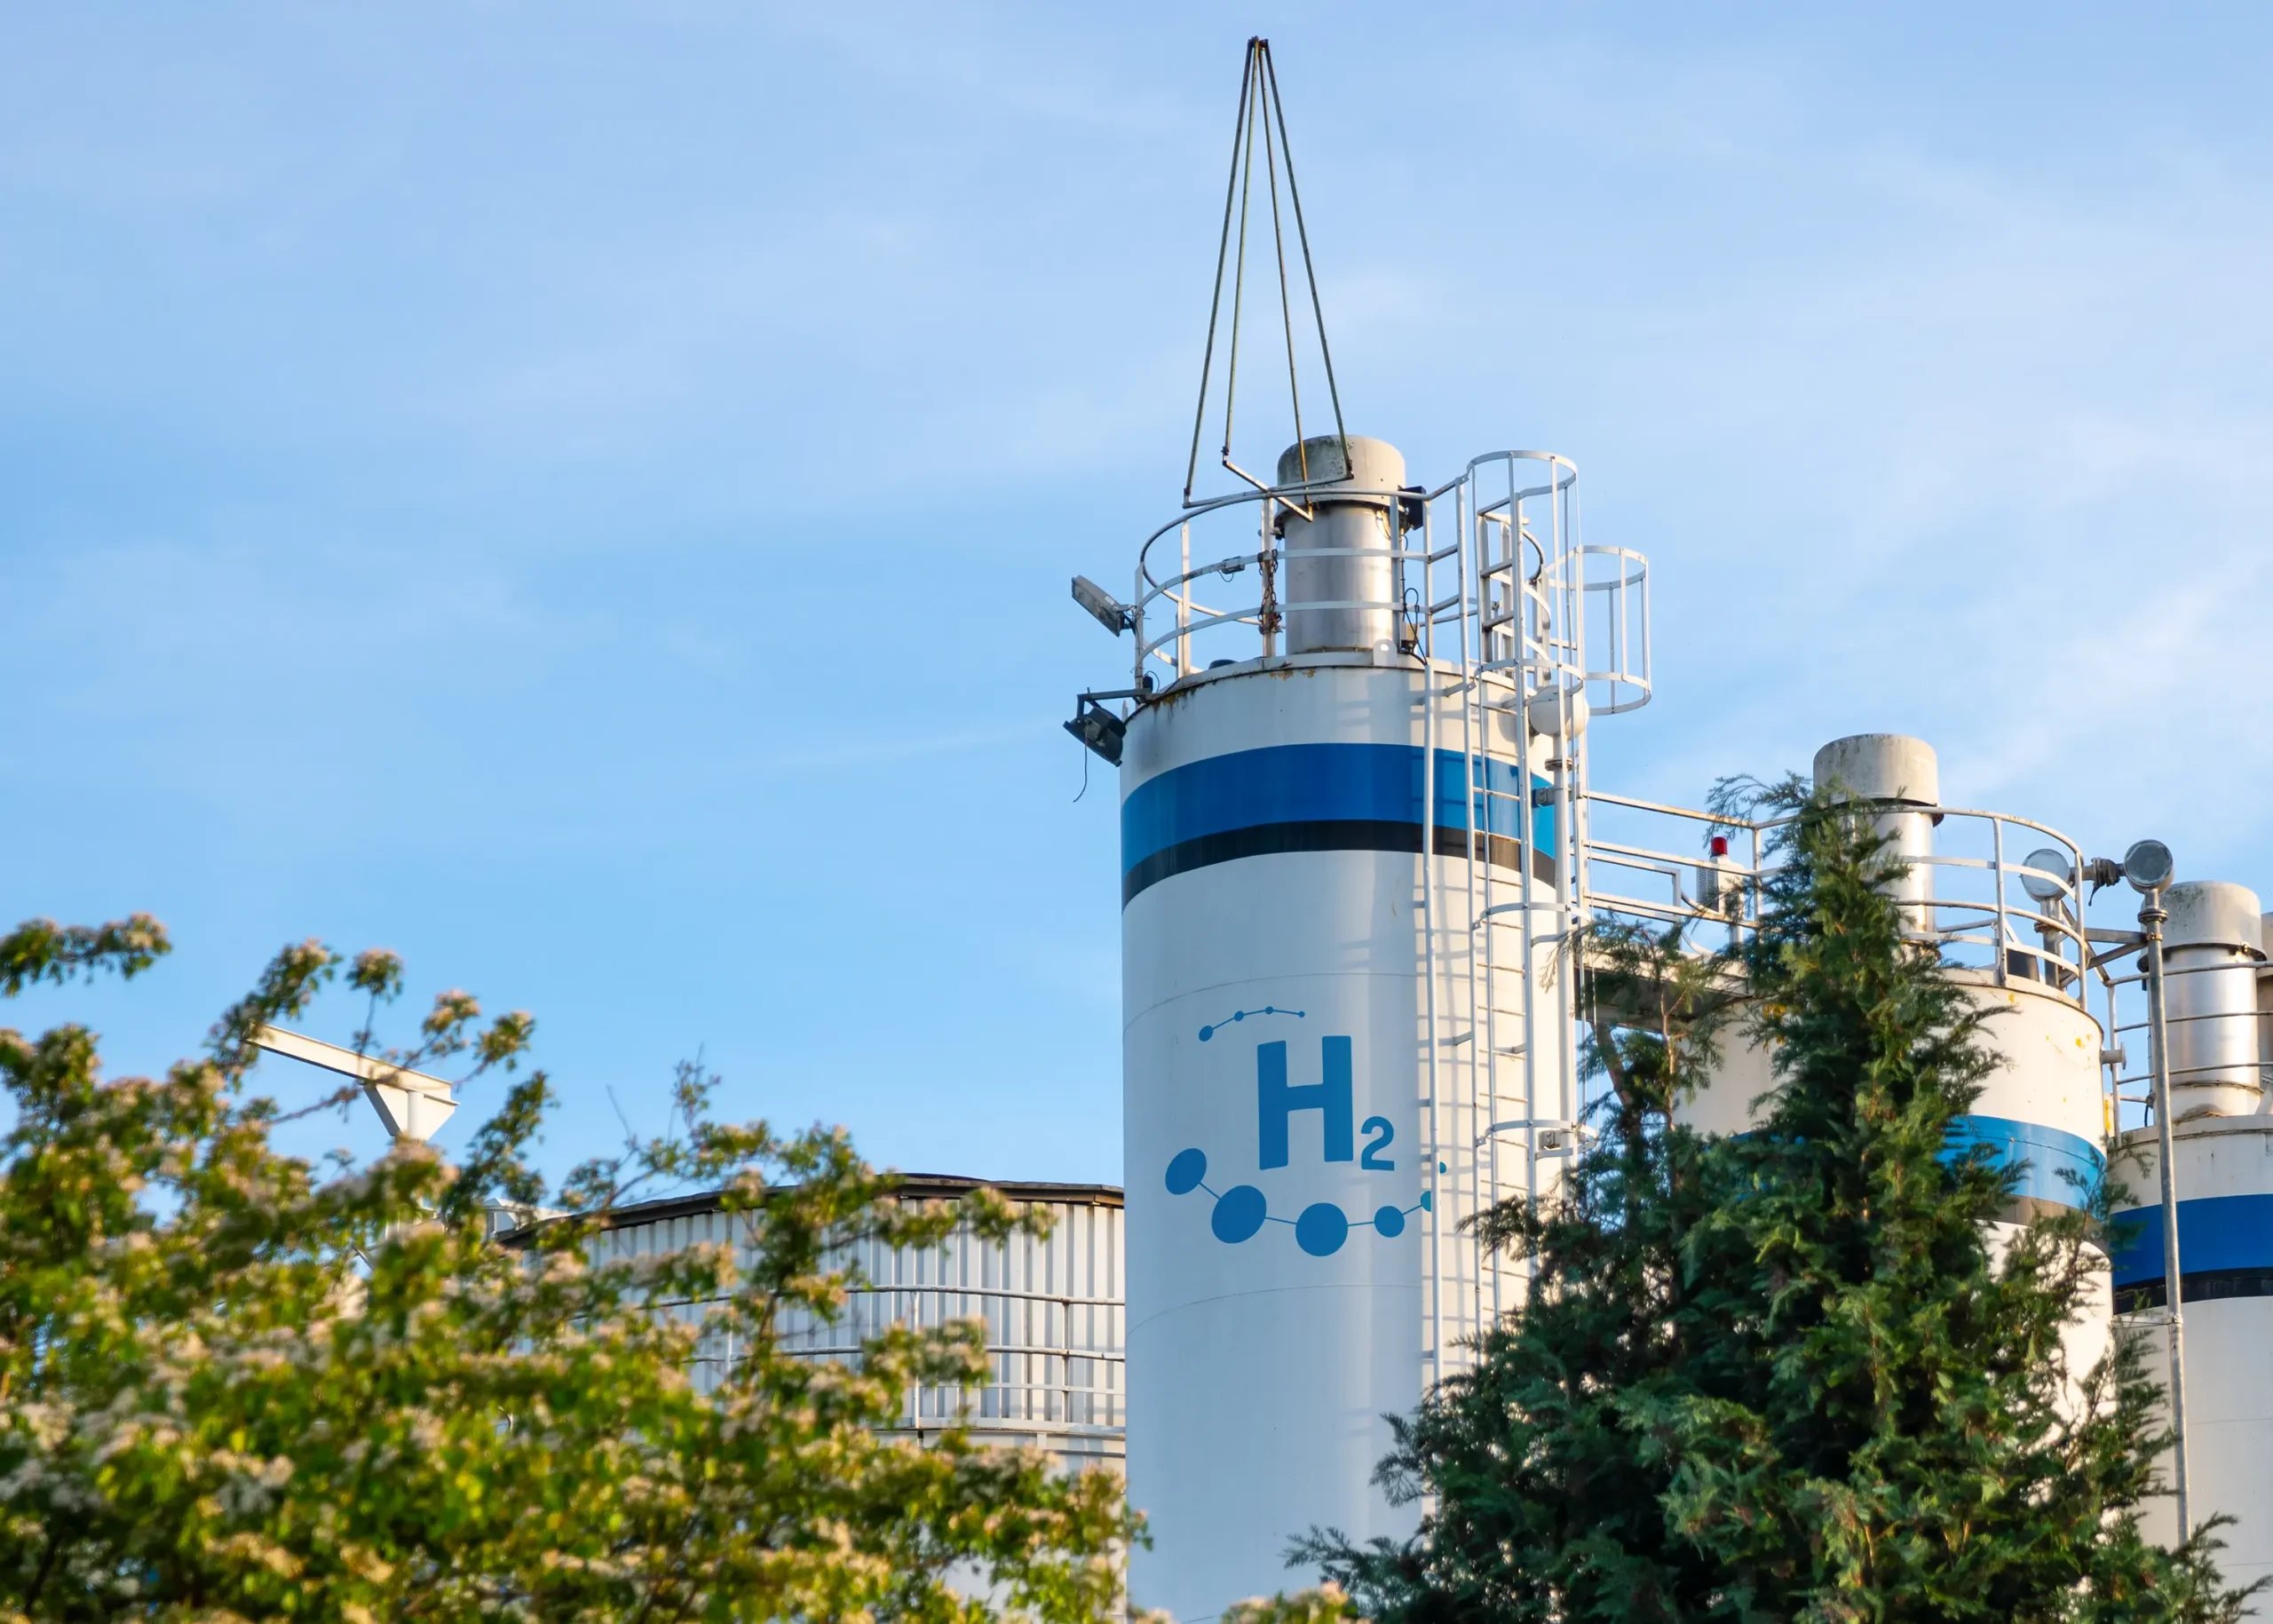 A hydrogen production facility is an industrial plant that uses various methods, such as electrolysis or steam reforming, to produce hydrogen gas. Hydrogen is used in a variety of industries, including chemical production, fuel cells, and transportation.